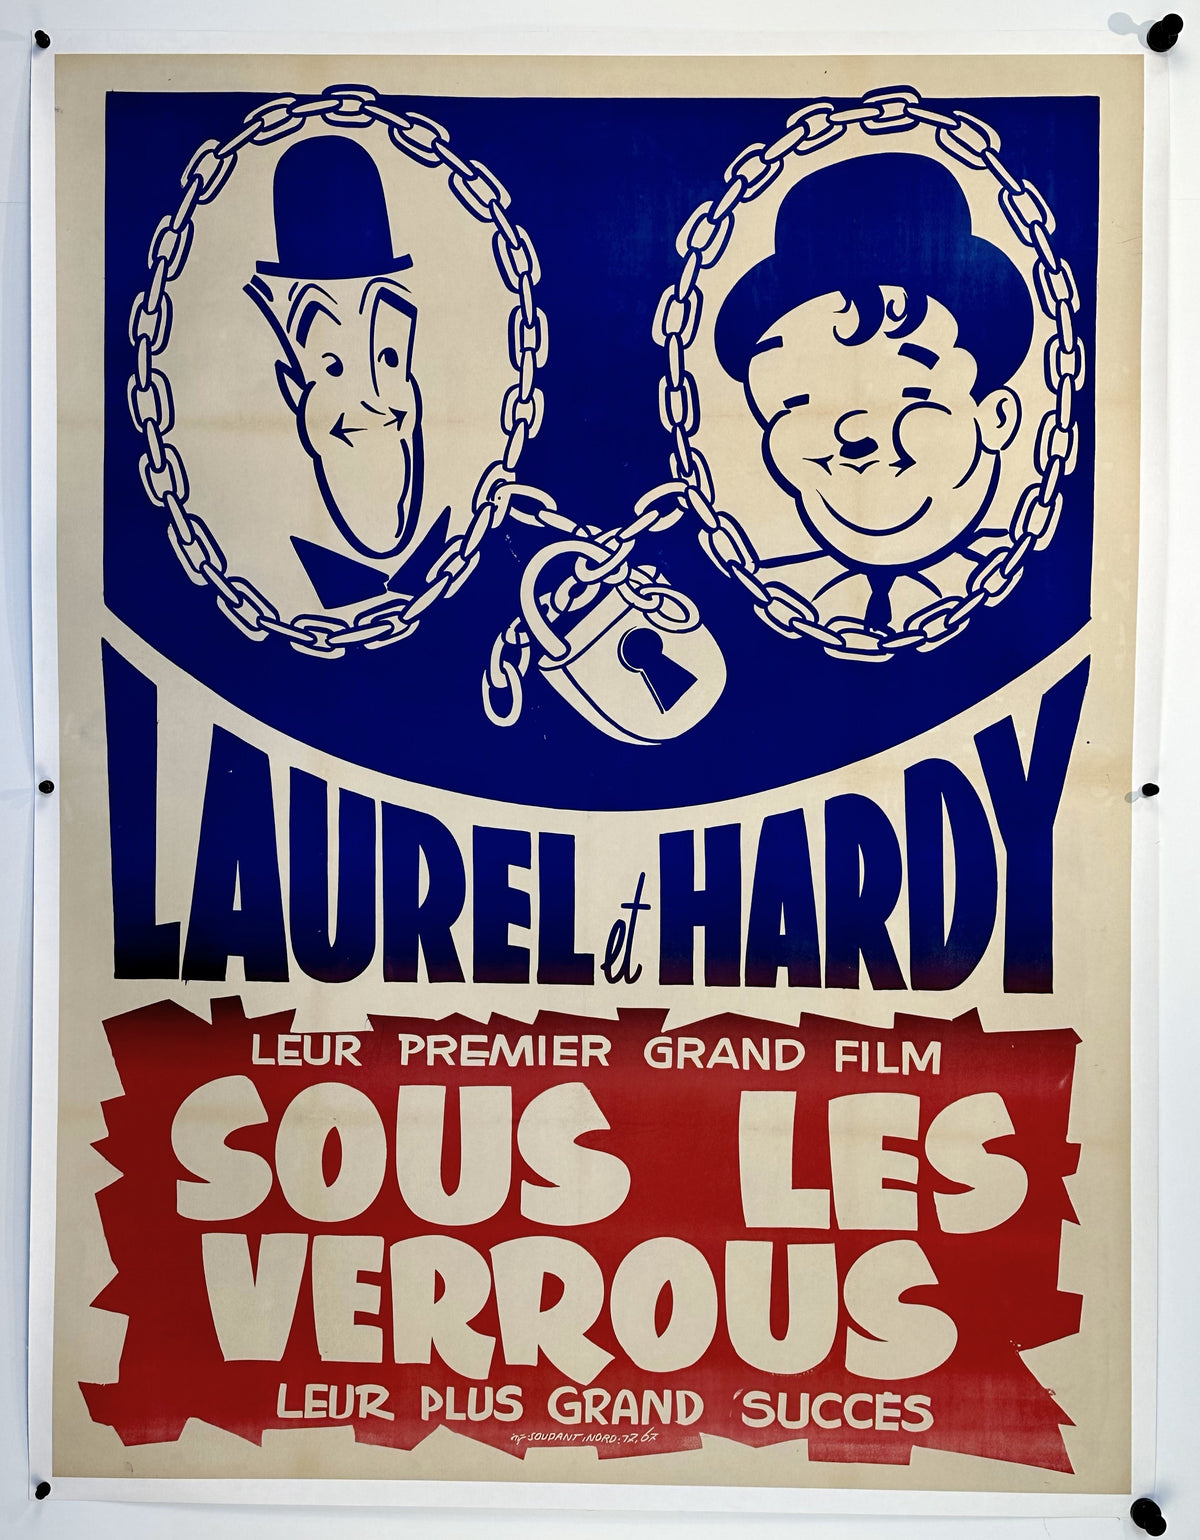 Laurel et Hardy- French Release - Authentic Vintage Poster